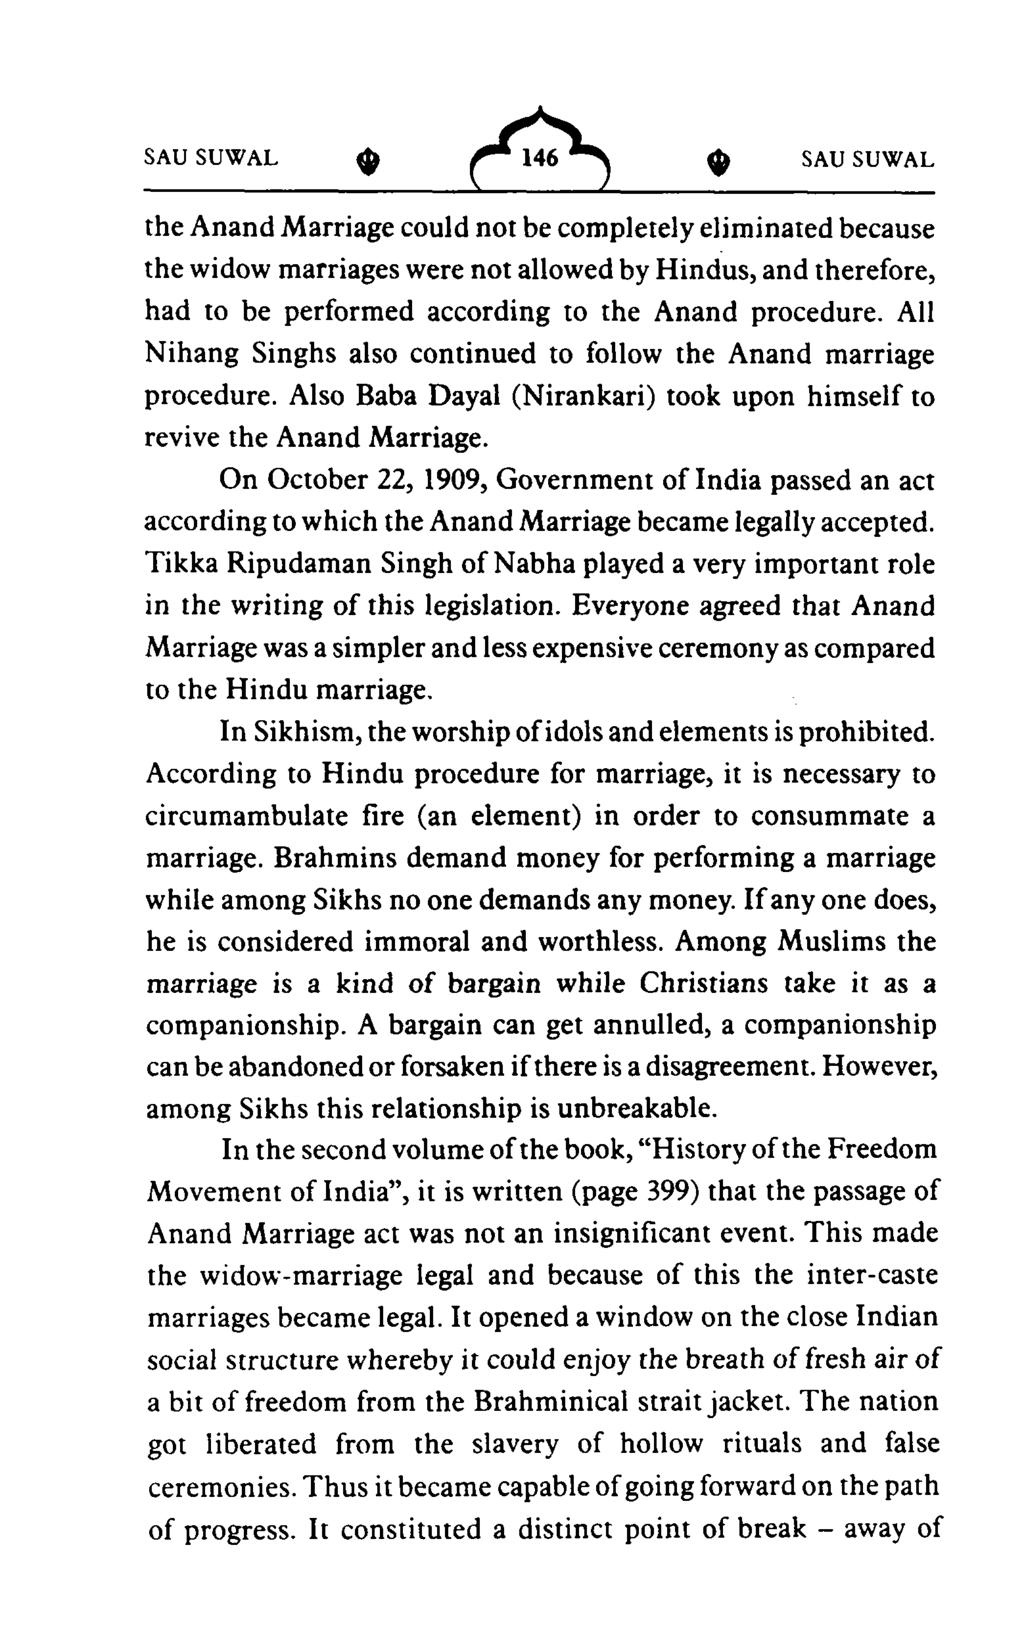 the Anand Marriage could not be completely eliminated because the widow marriages were not allowed by Hindus, and therefore, had to be performed according to the Anand procedure.